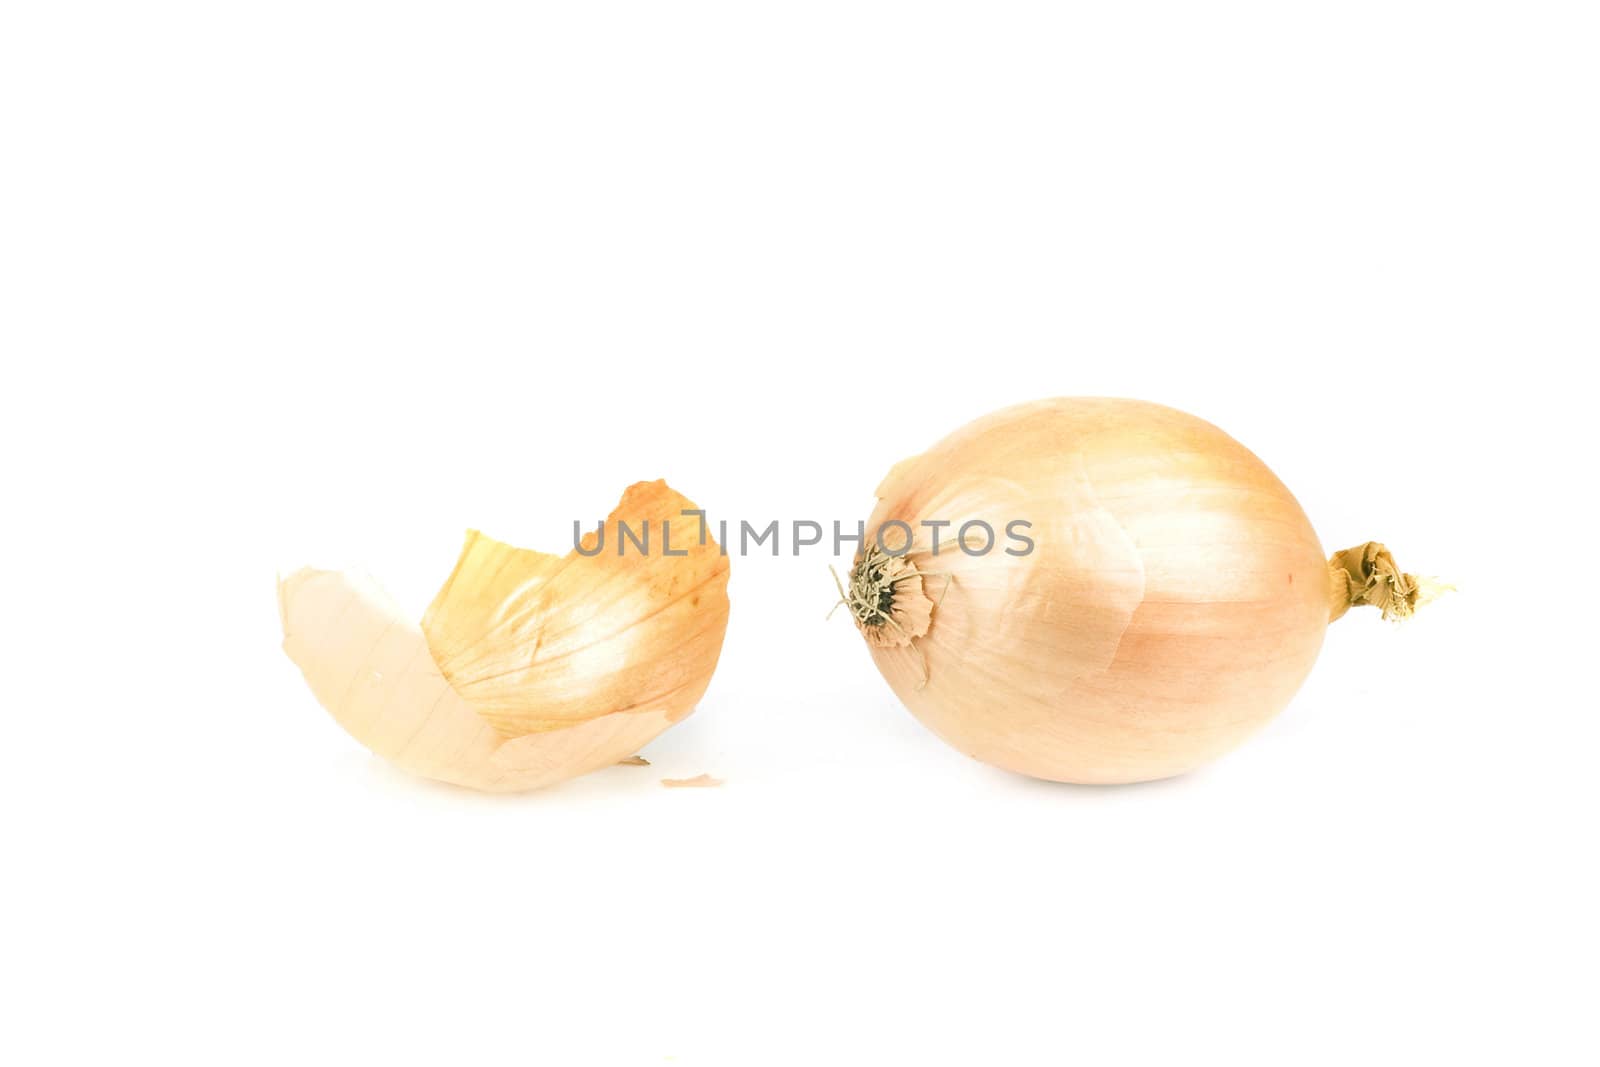 a healthy onion, isolated on a white background